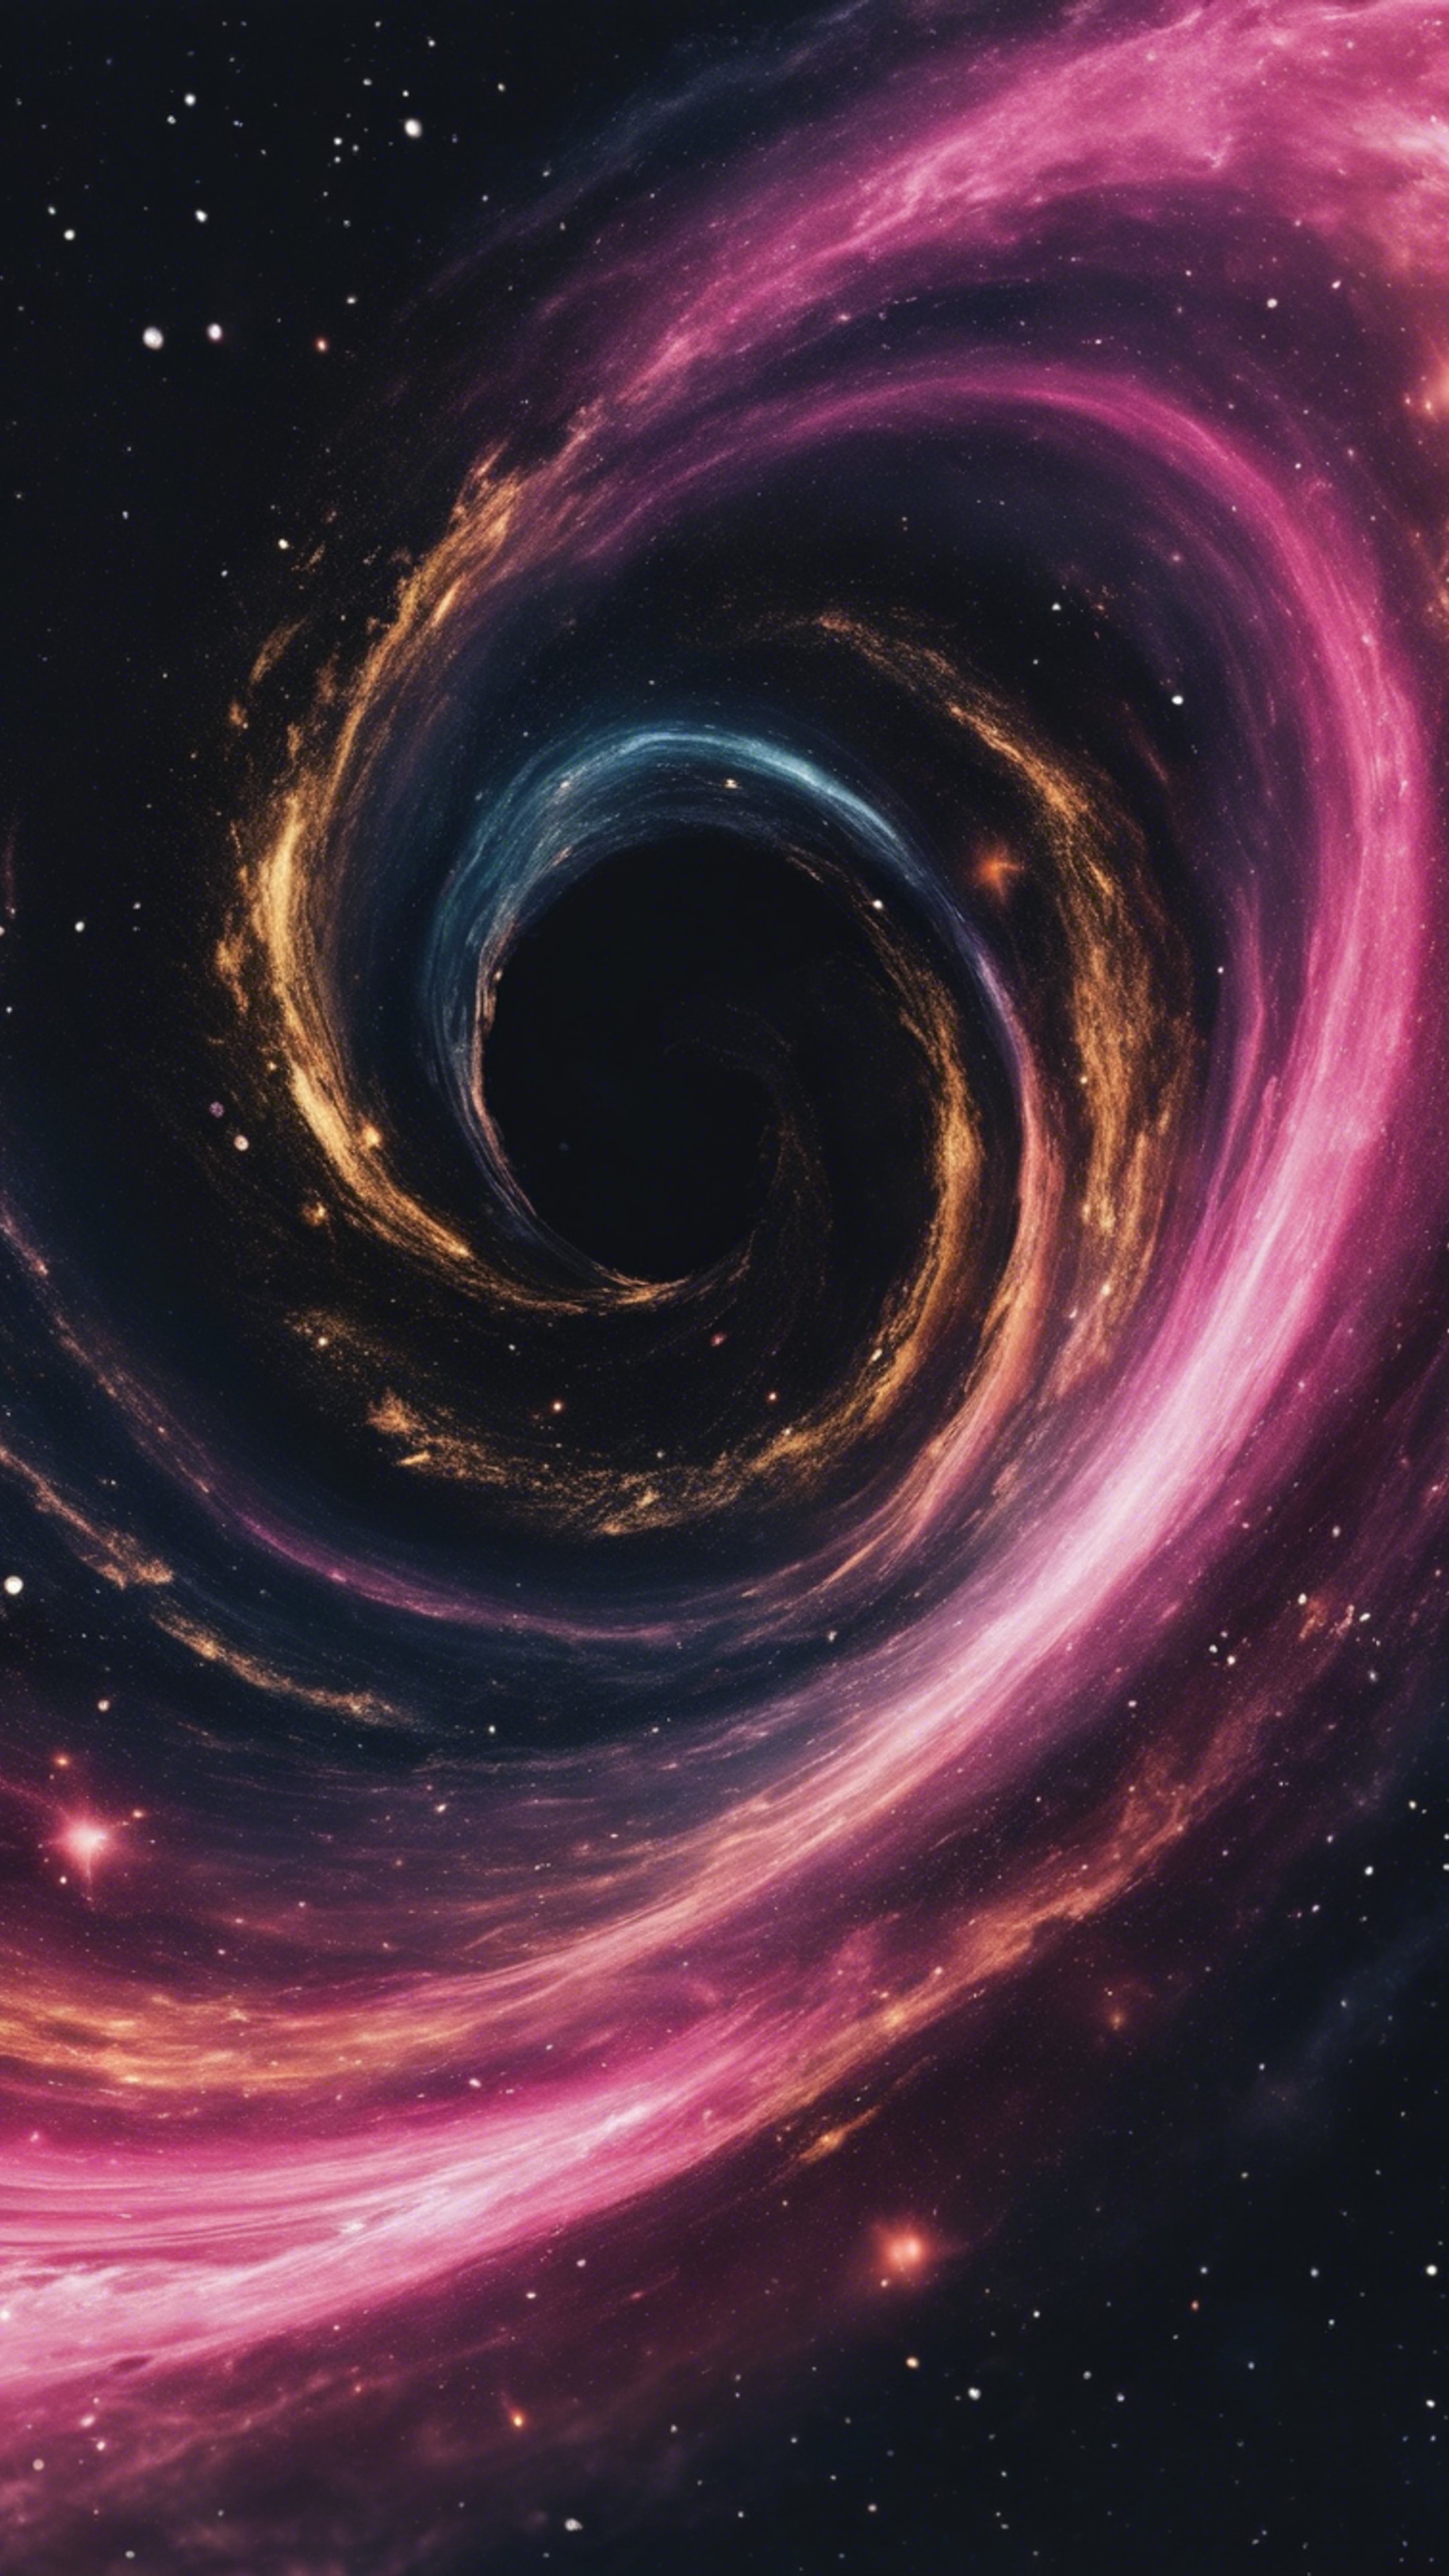 A swirling Galaxy with hues of pink and gold amongst the dark void of space. Fond d'écran[38386911806f452c9333]